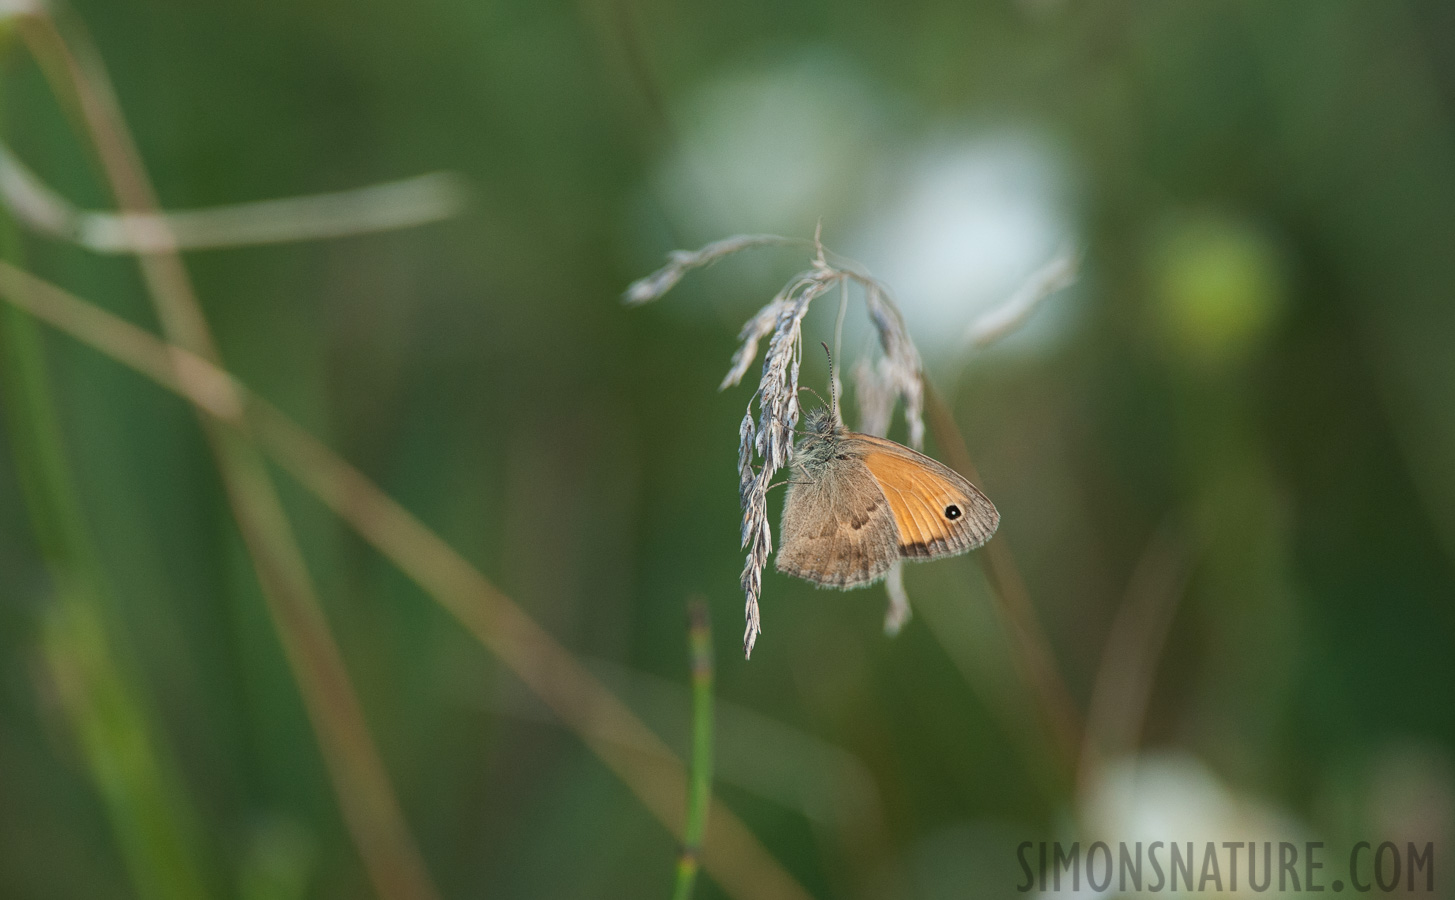 Hungary - Coenonympha pamphilus [550 mm, 1/800 sec at f / 8.0, ISO 1600]